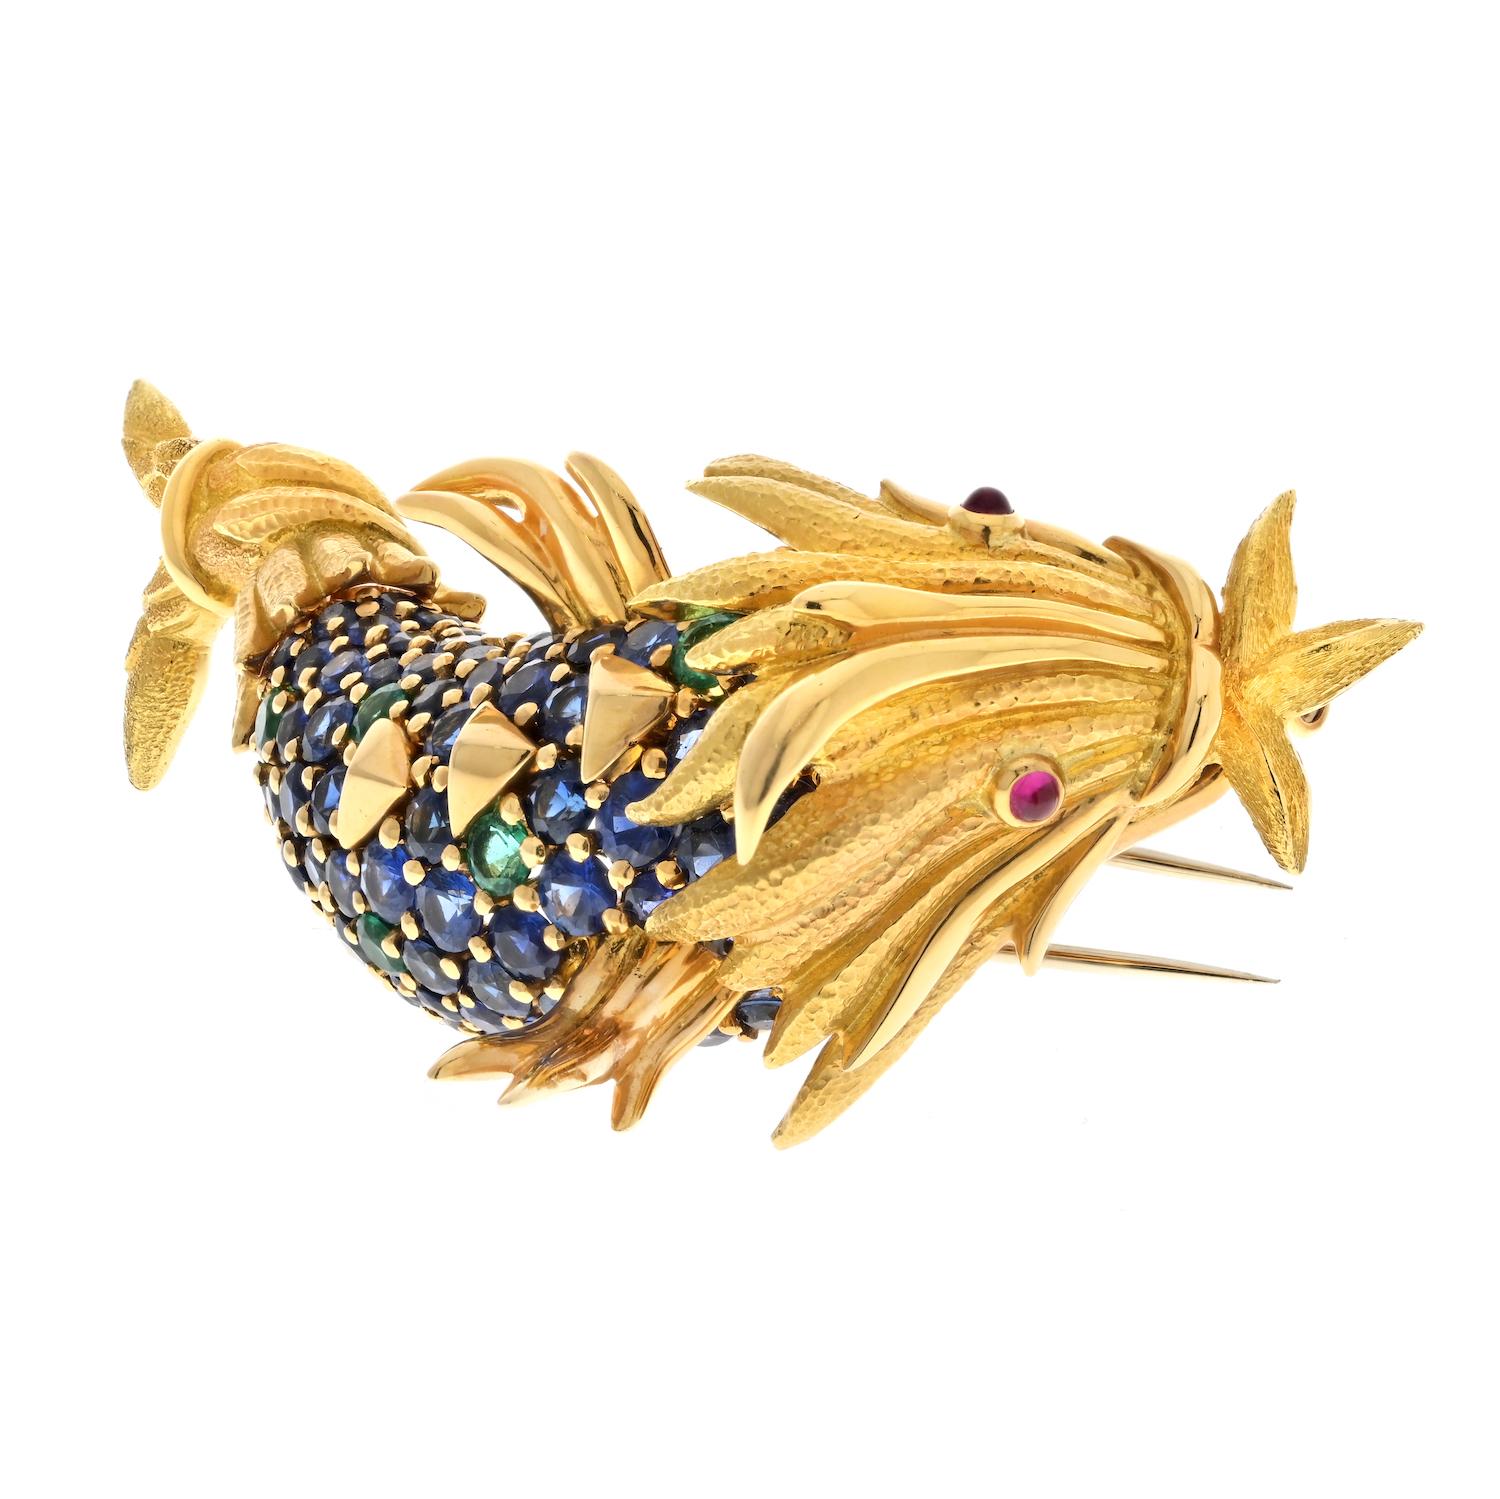 The Tiffany & Co. 18K Gold Schlumberger Sapphire and Green Emerald Koi Fish Brooch is a stunning example of the brand's commitment to fine jewelry craftsmanship. This brooch is made from 18k yellow gold and is mounted with round cut sapphires and